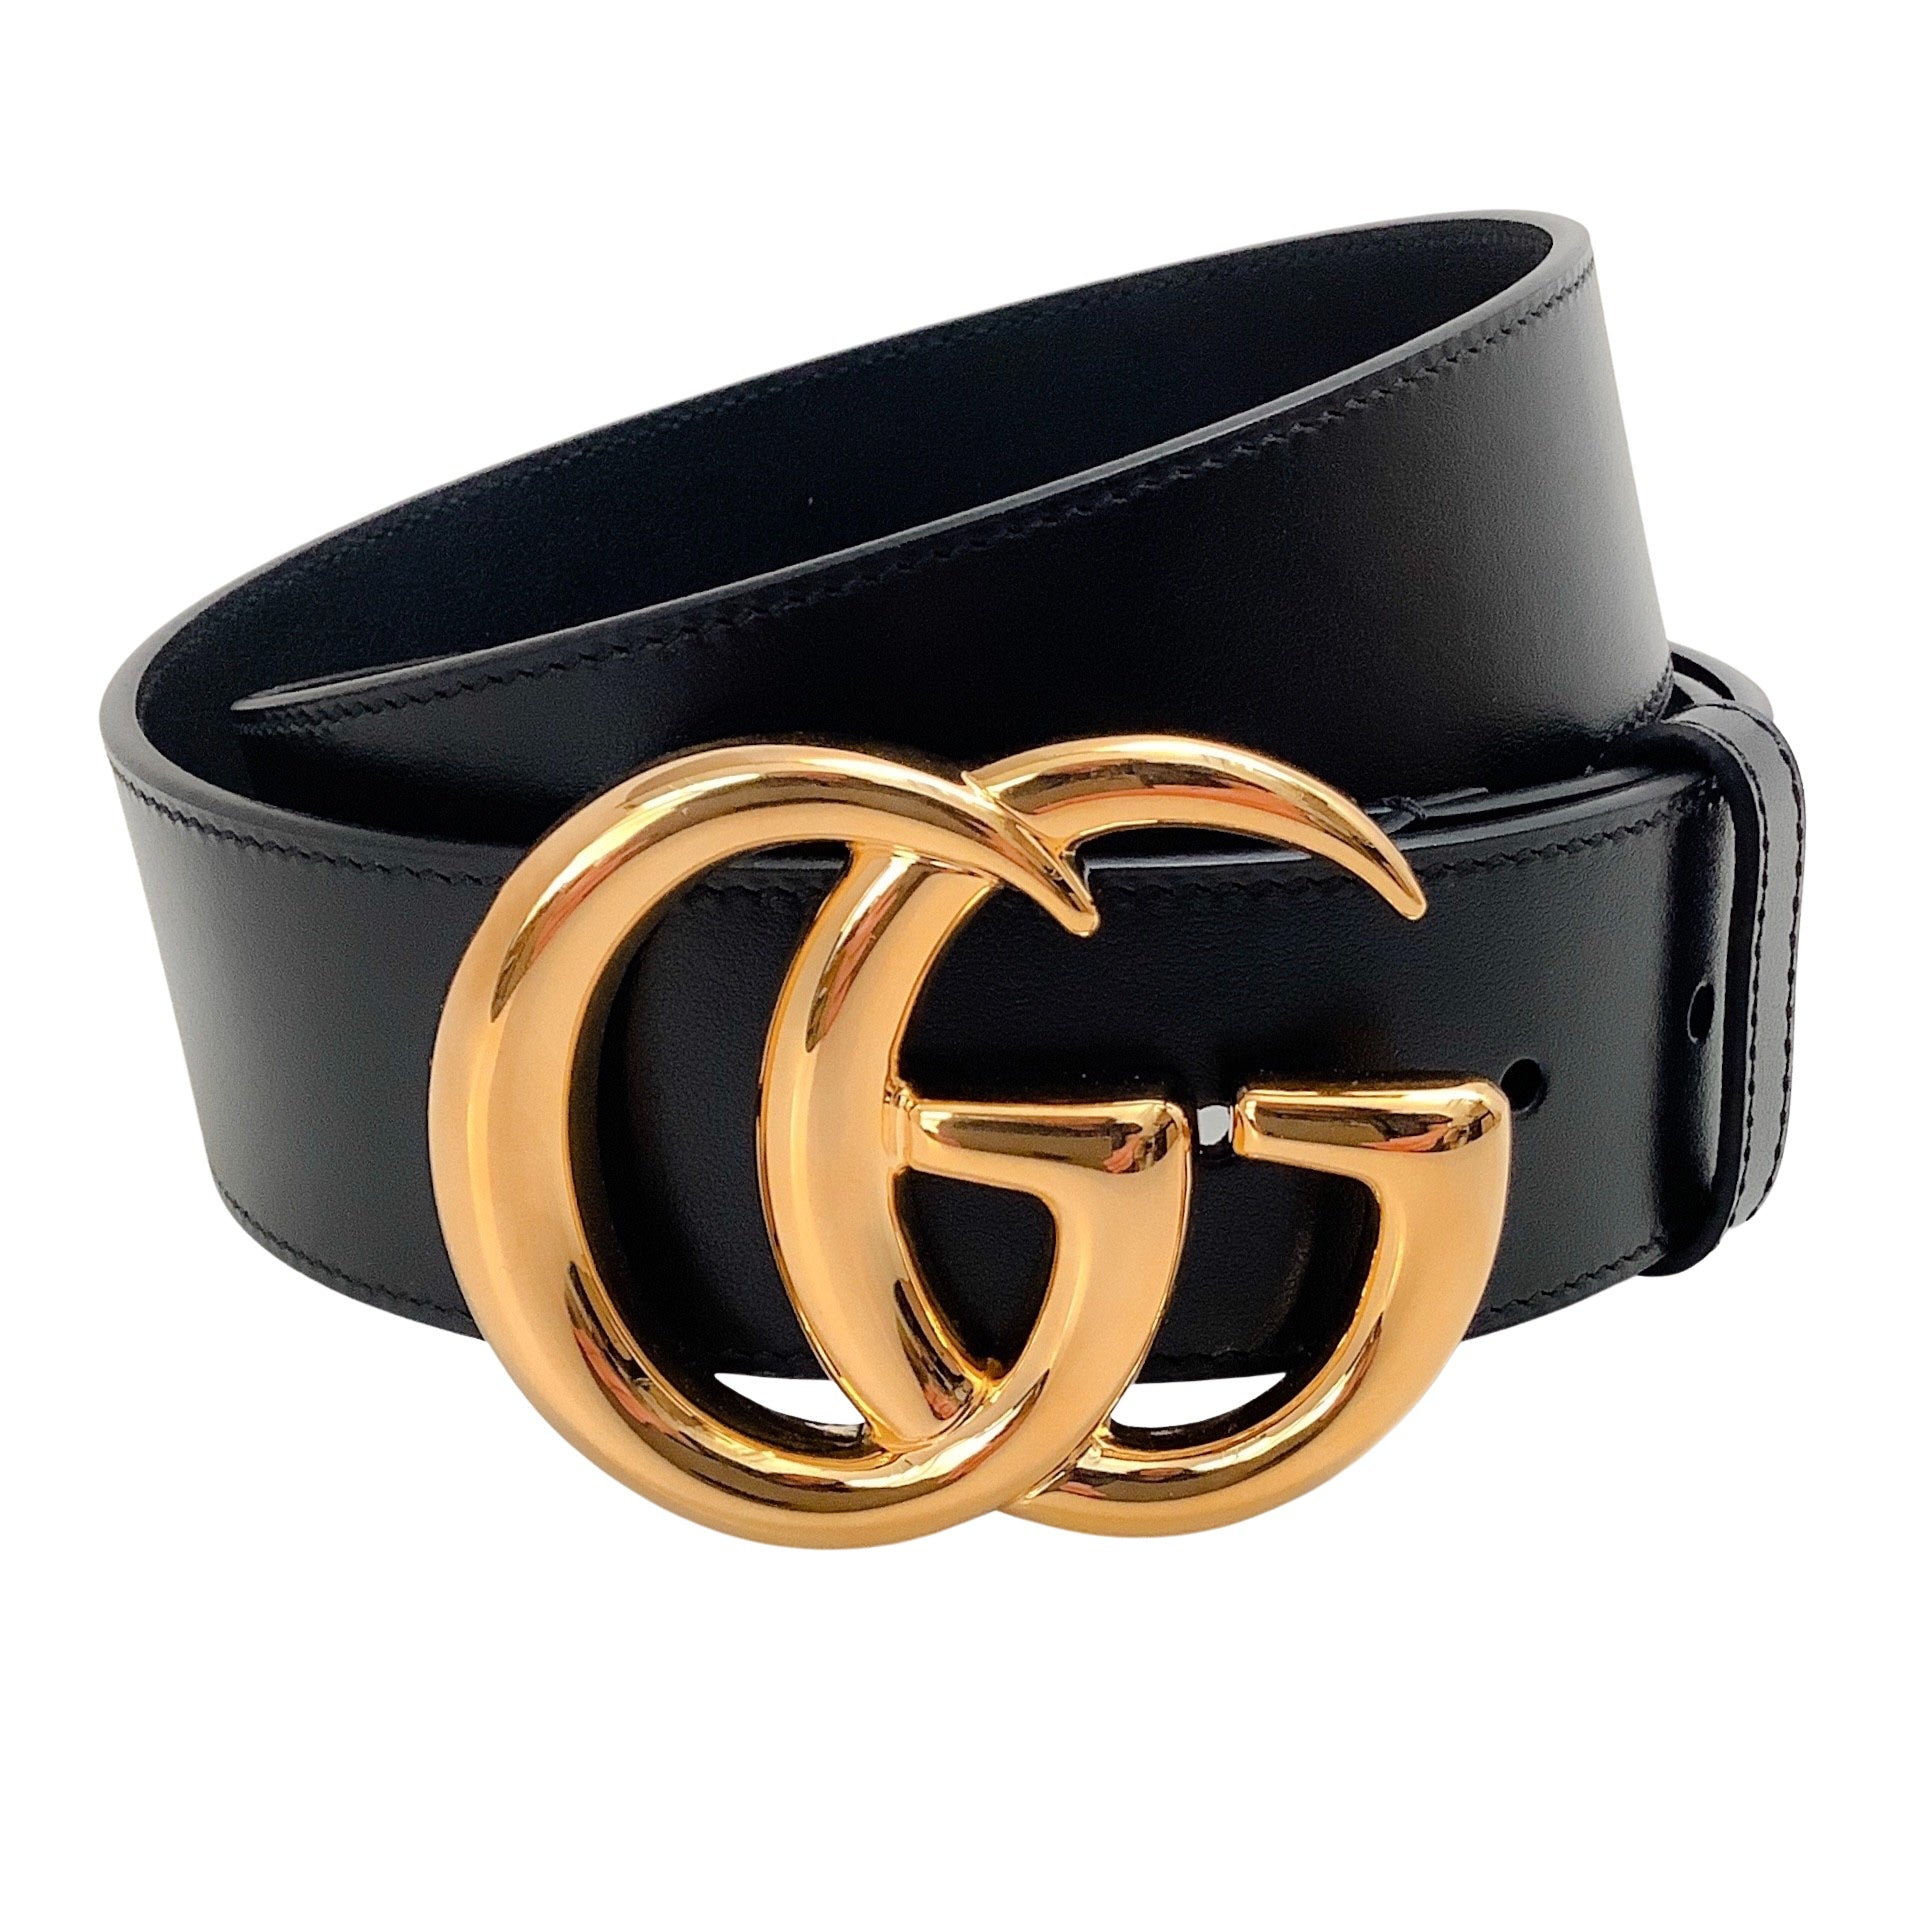 Gucci 34MM Black Leather Belt with Gold GG Logo Buckle